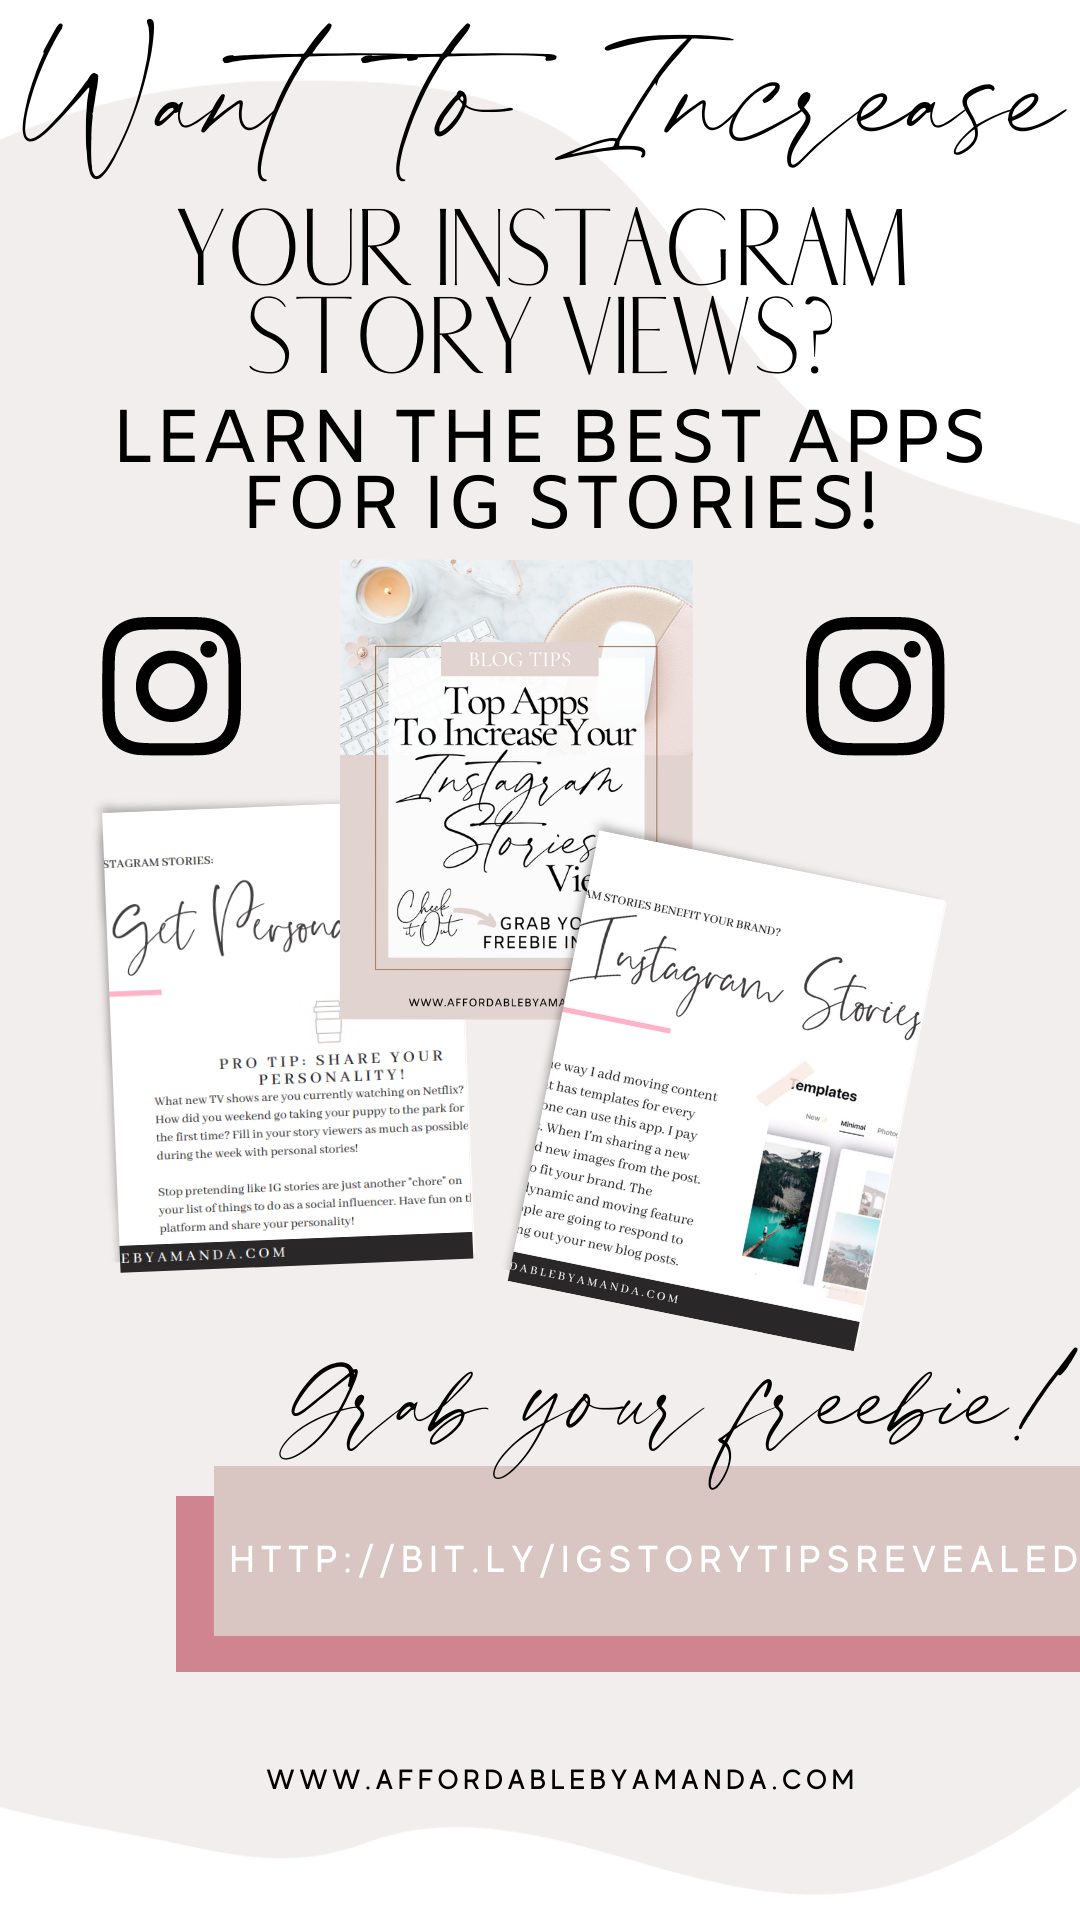 How to Increase Instagram Story Views - Instagram Stories in 2020 | Top Apps to Increase Your Story Views on Instagram